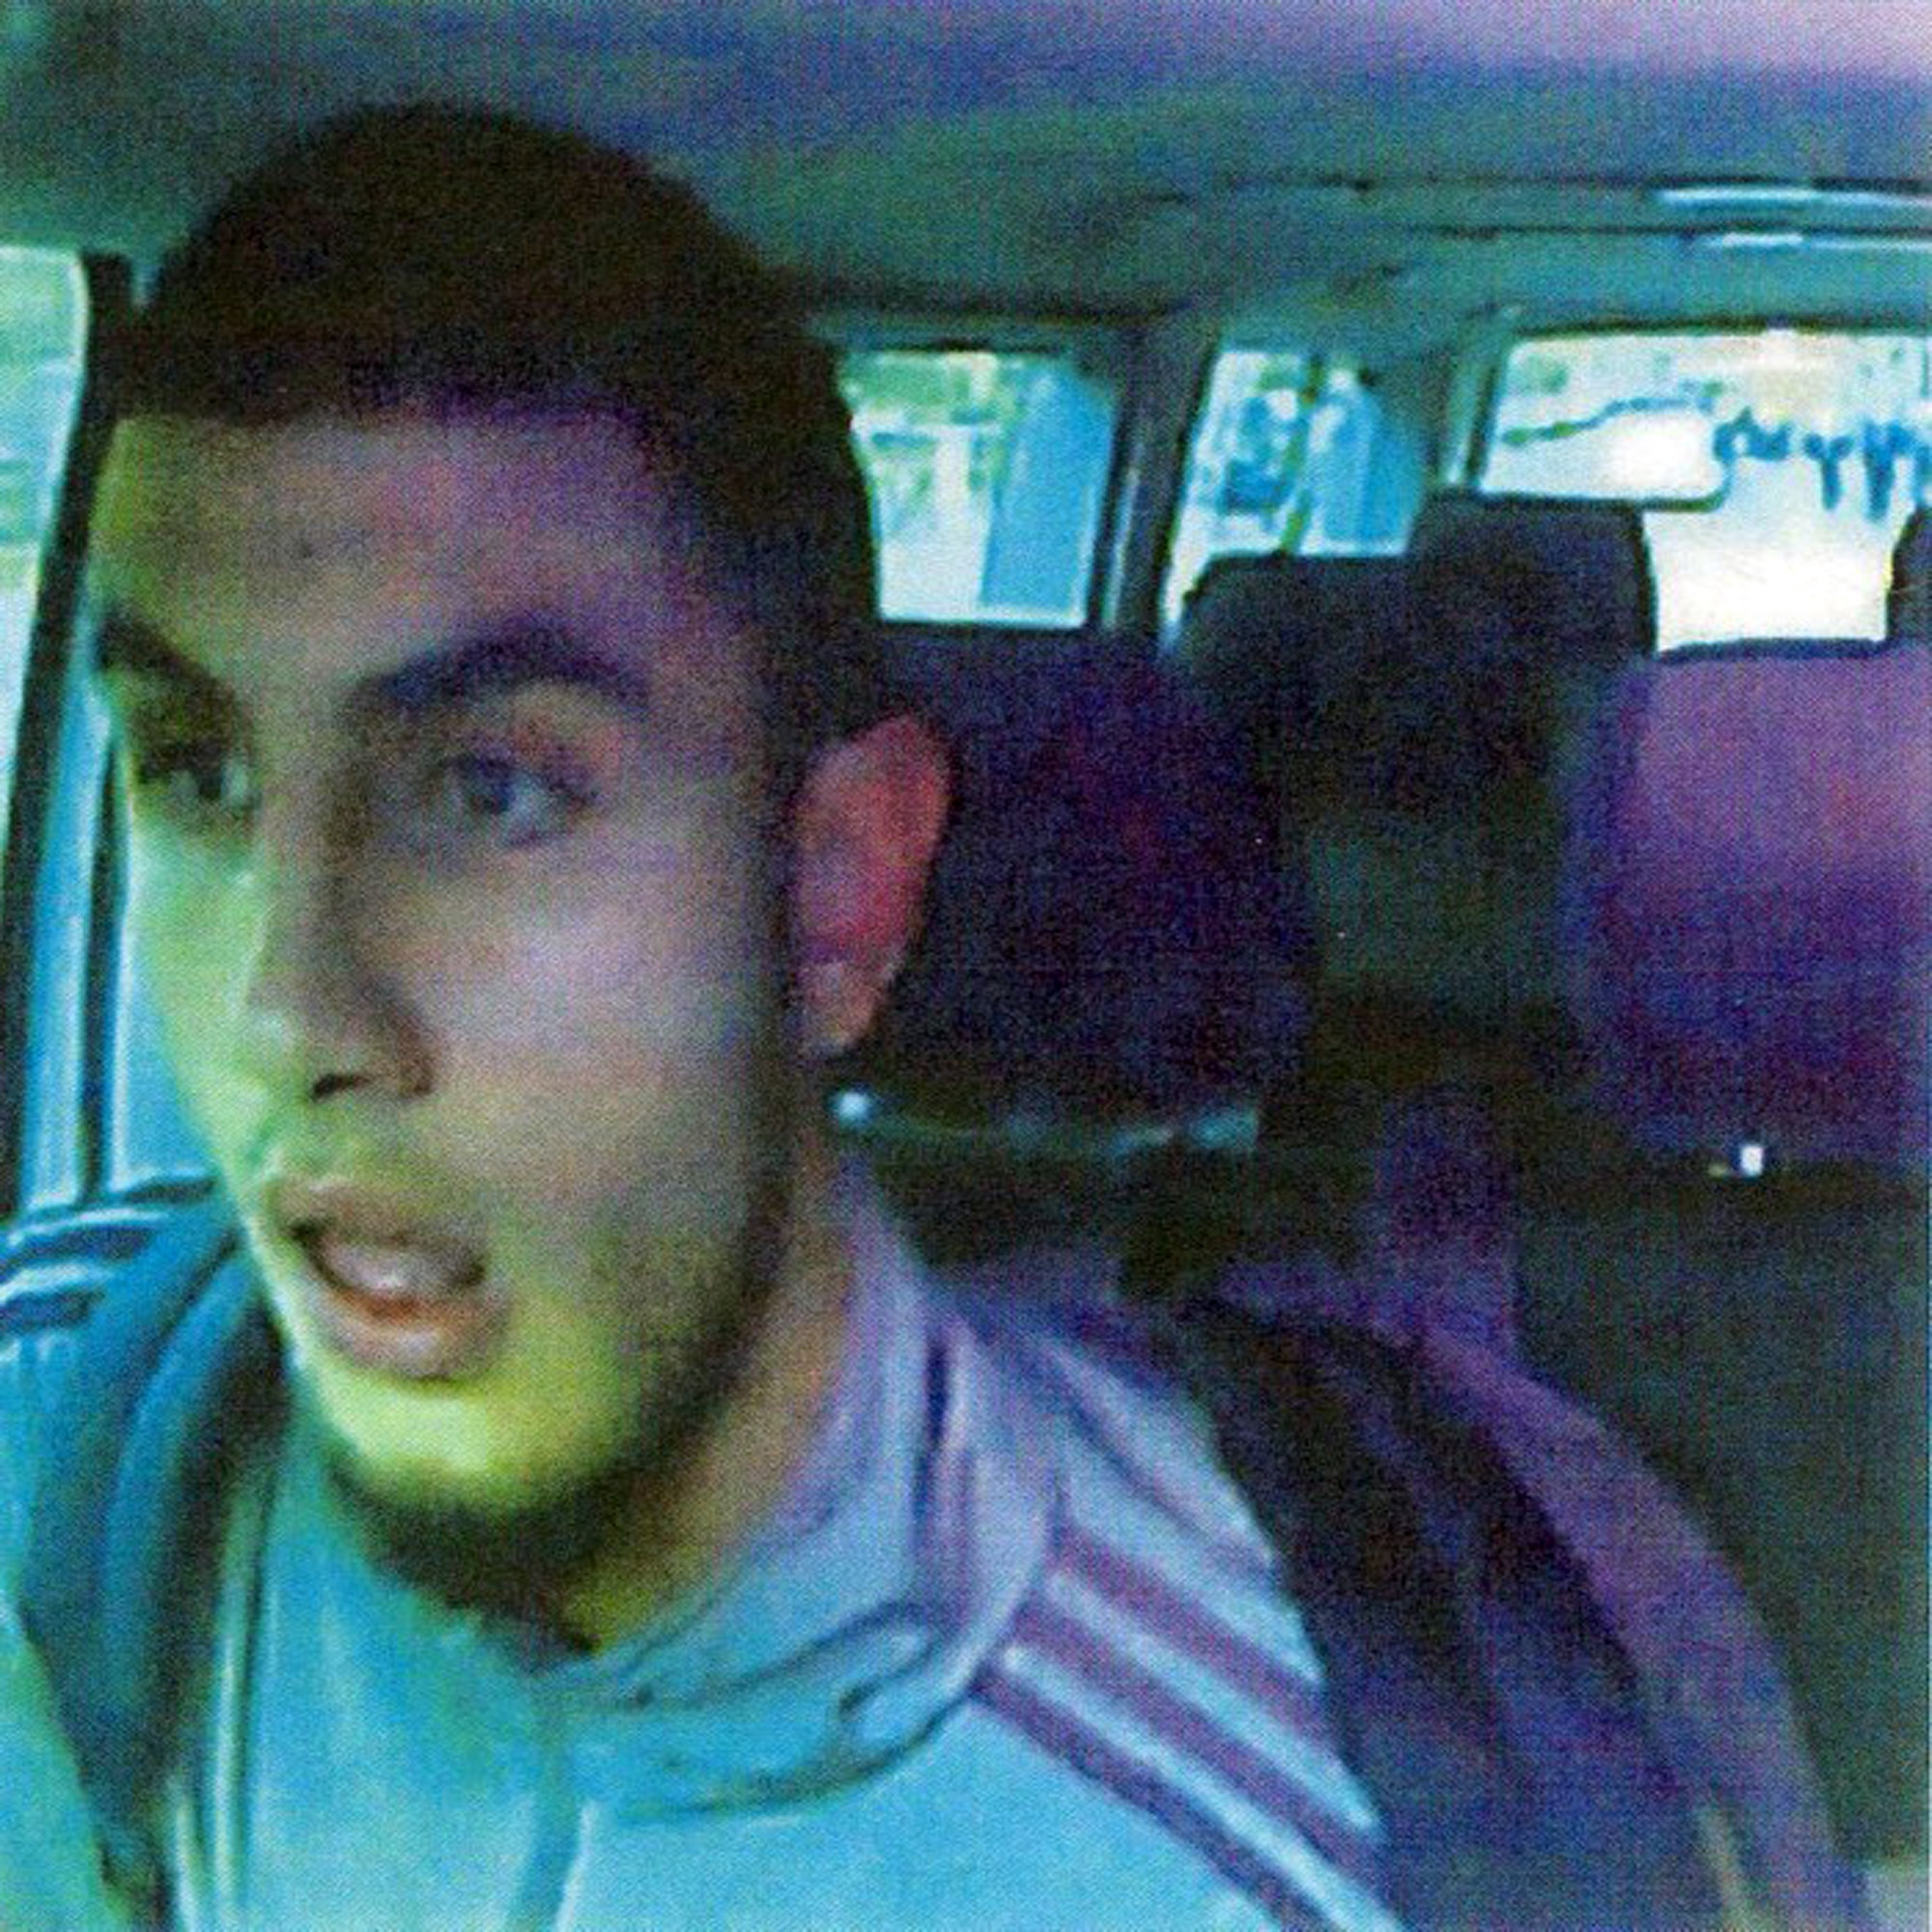 PHOTO: This undated police handout image released on Feb. 16, 2015 shows Omar Abdel Hamid El-Hussein, the slain gunman suspected in the deadly Copenhagen attacks that occurred on Feb. 14, 2015. 